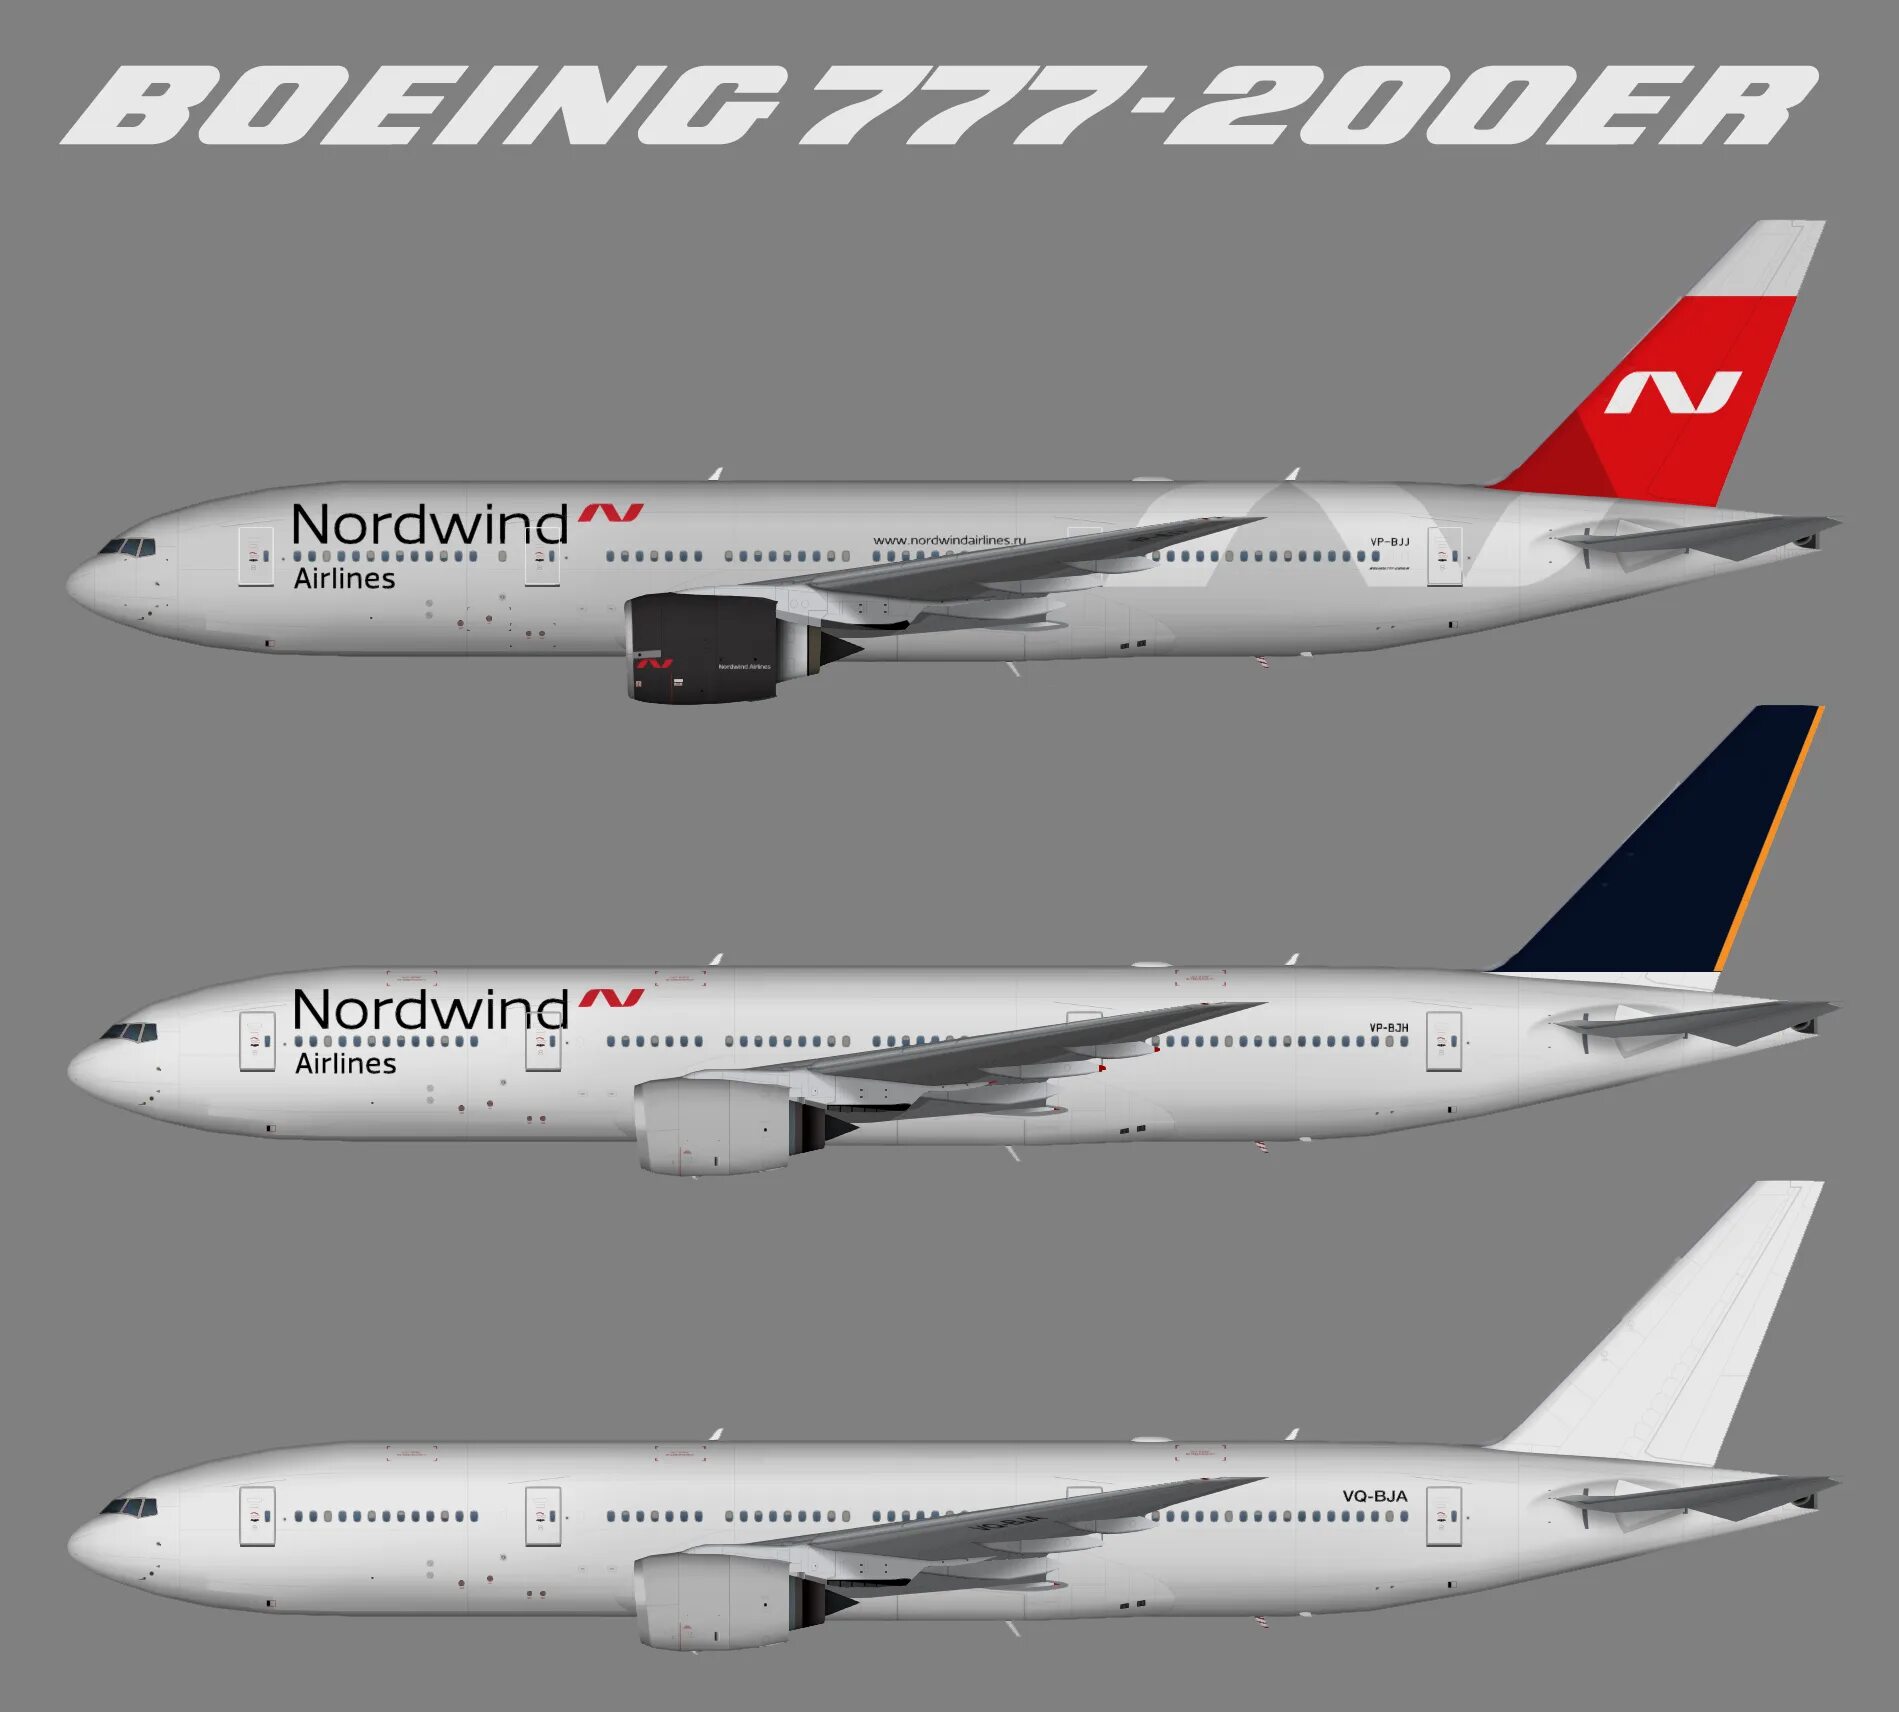 Boeing 777 Nordwind Airlines. 777-300er Норд Винд. Боинг 777 300 er Норд Винд. Боинг 777 200 er Норд Винд.